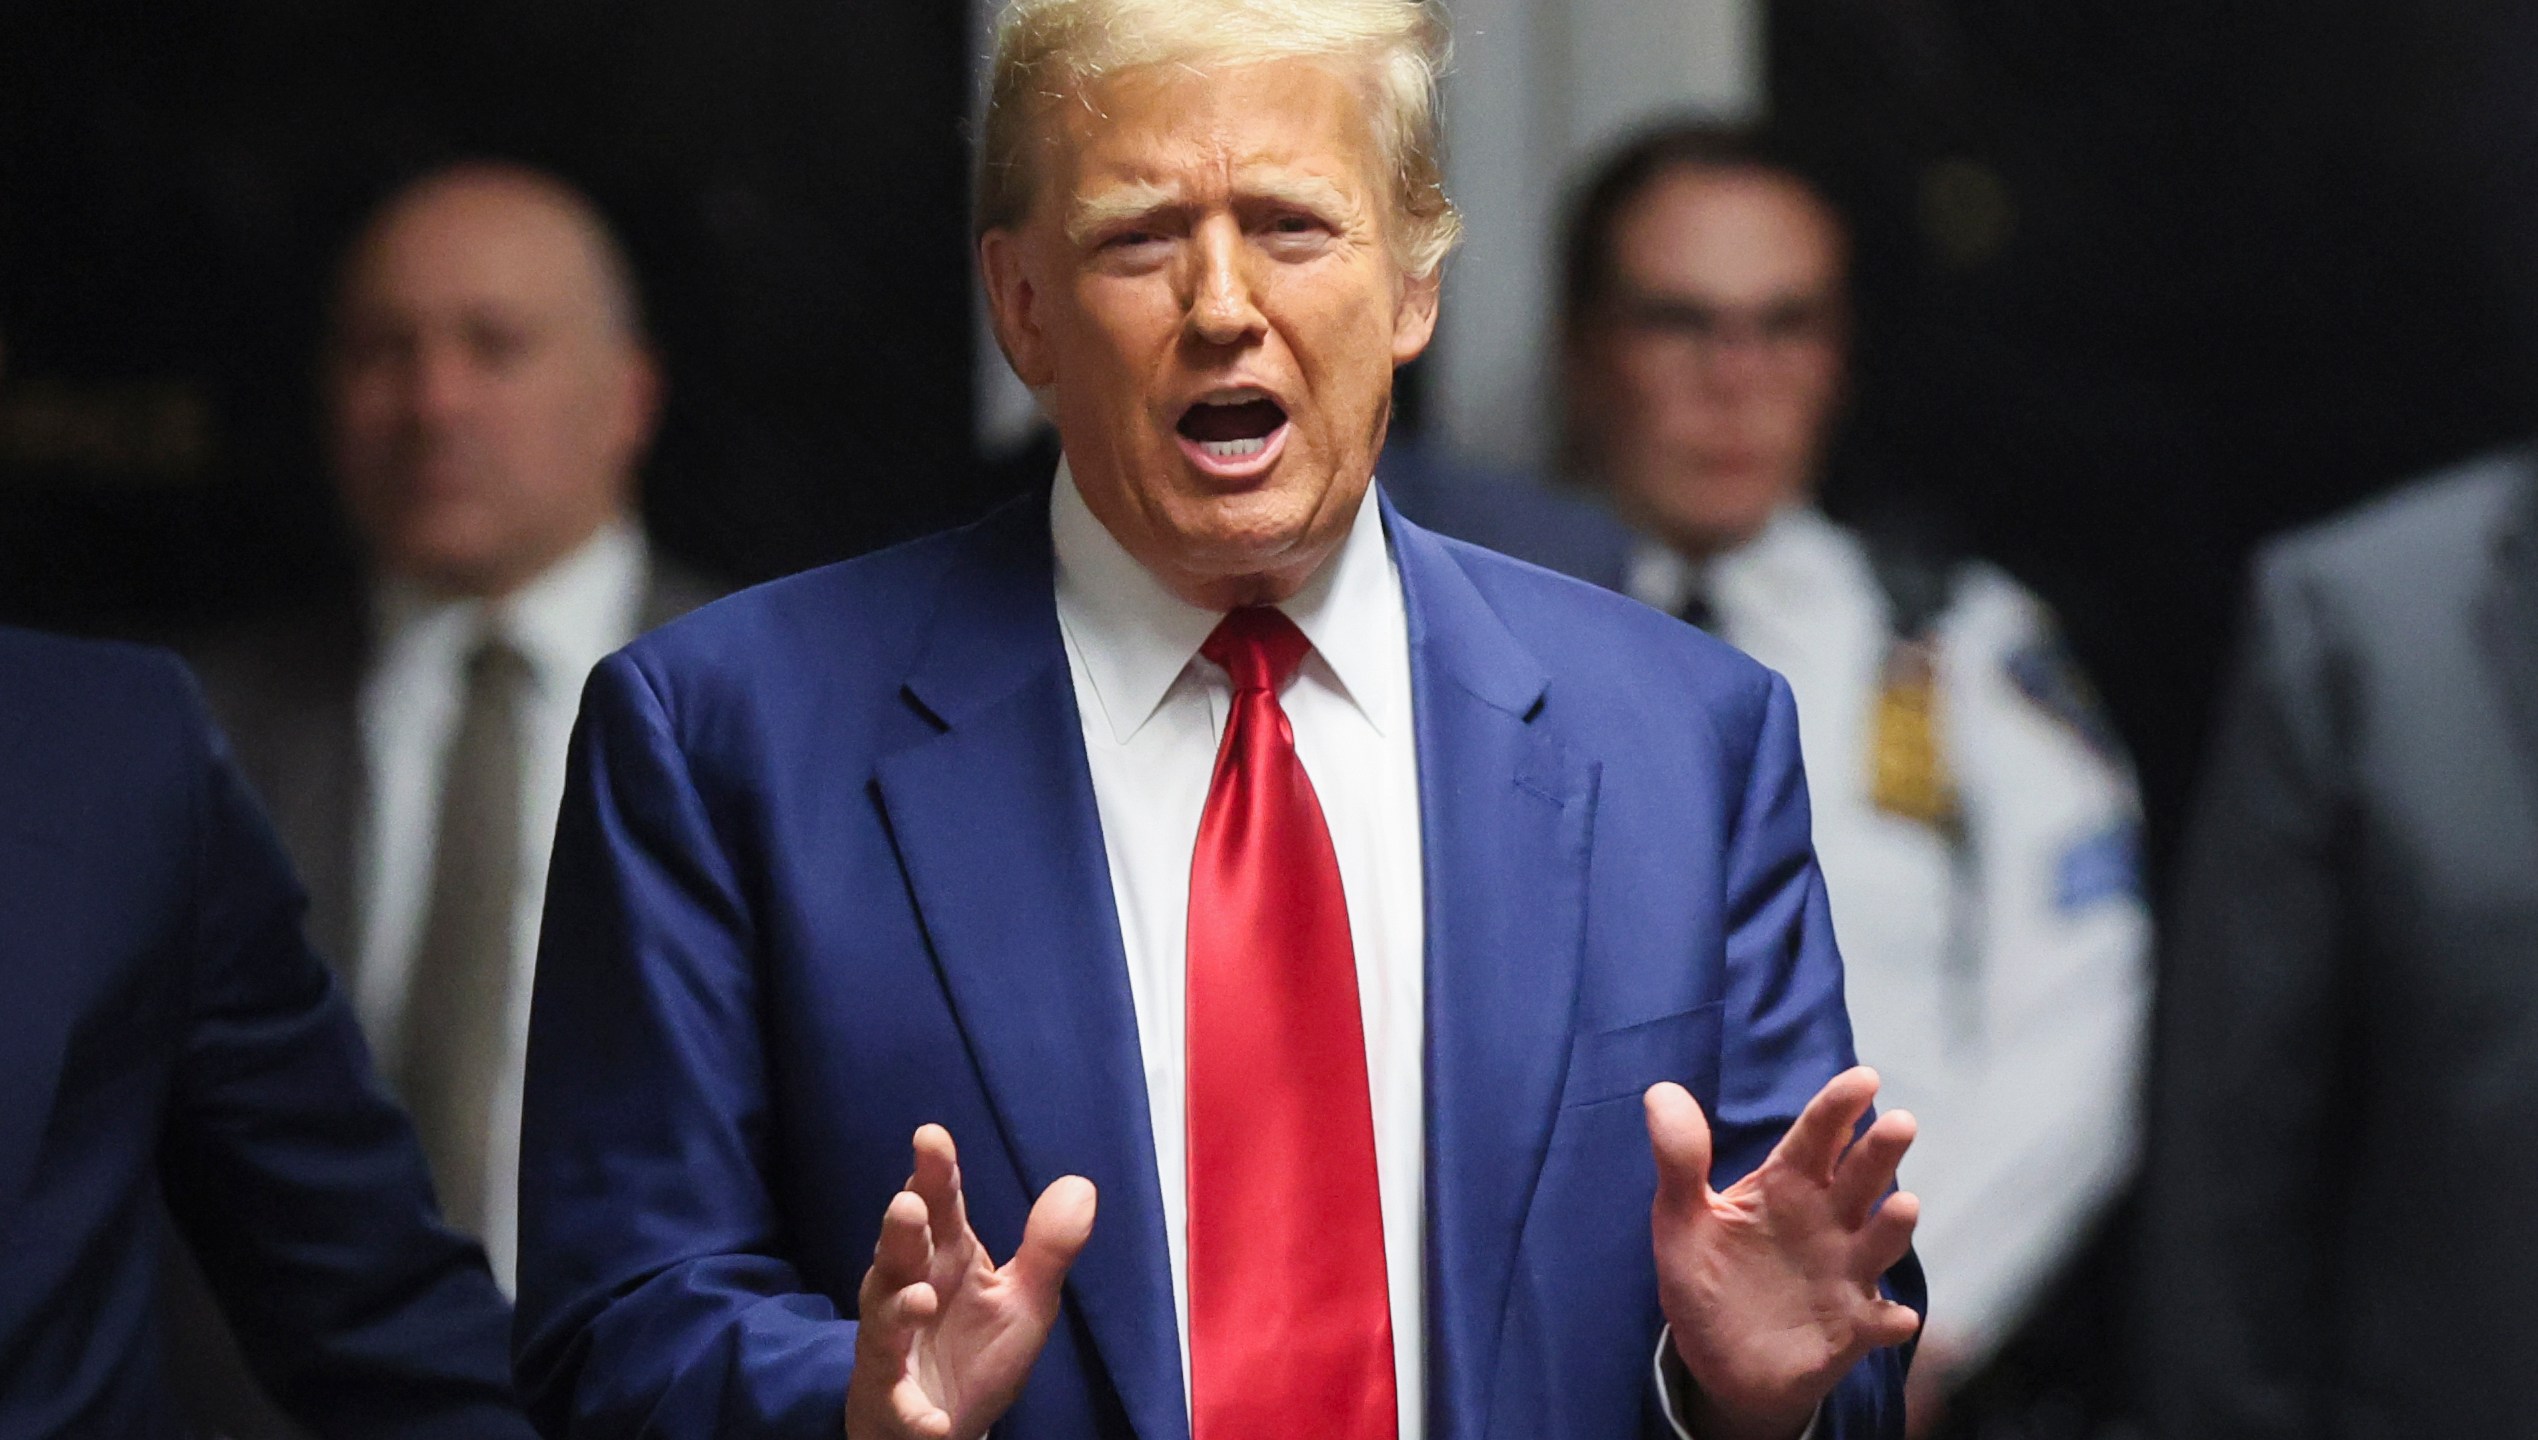 Former President Donald Trump speaks after hearing at New York Criminal Court, Monday, March 25, 2024, in New York. New York Judge Juan M. Merchan has scheduled an April 15 trial date in Trump's hush money case. (Brendan McDermid/Pool Photo via AP)